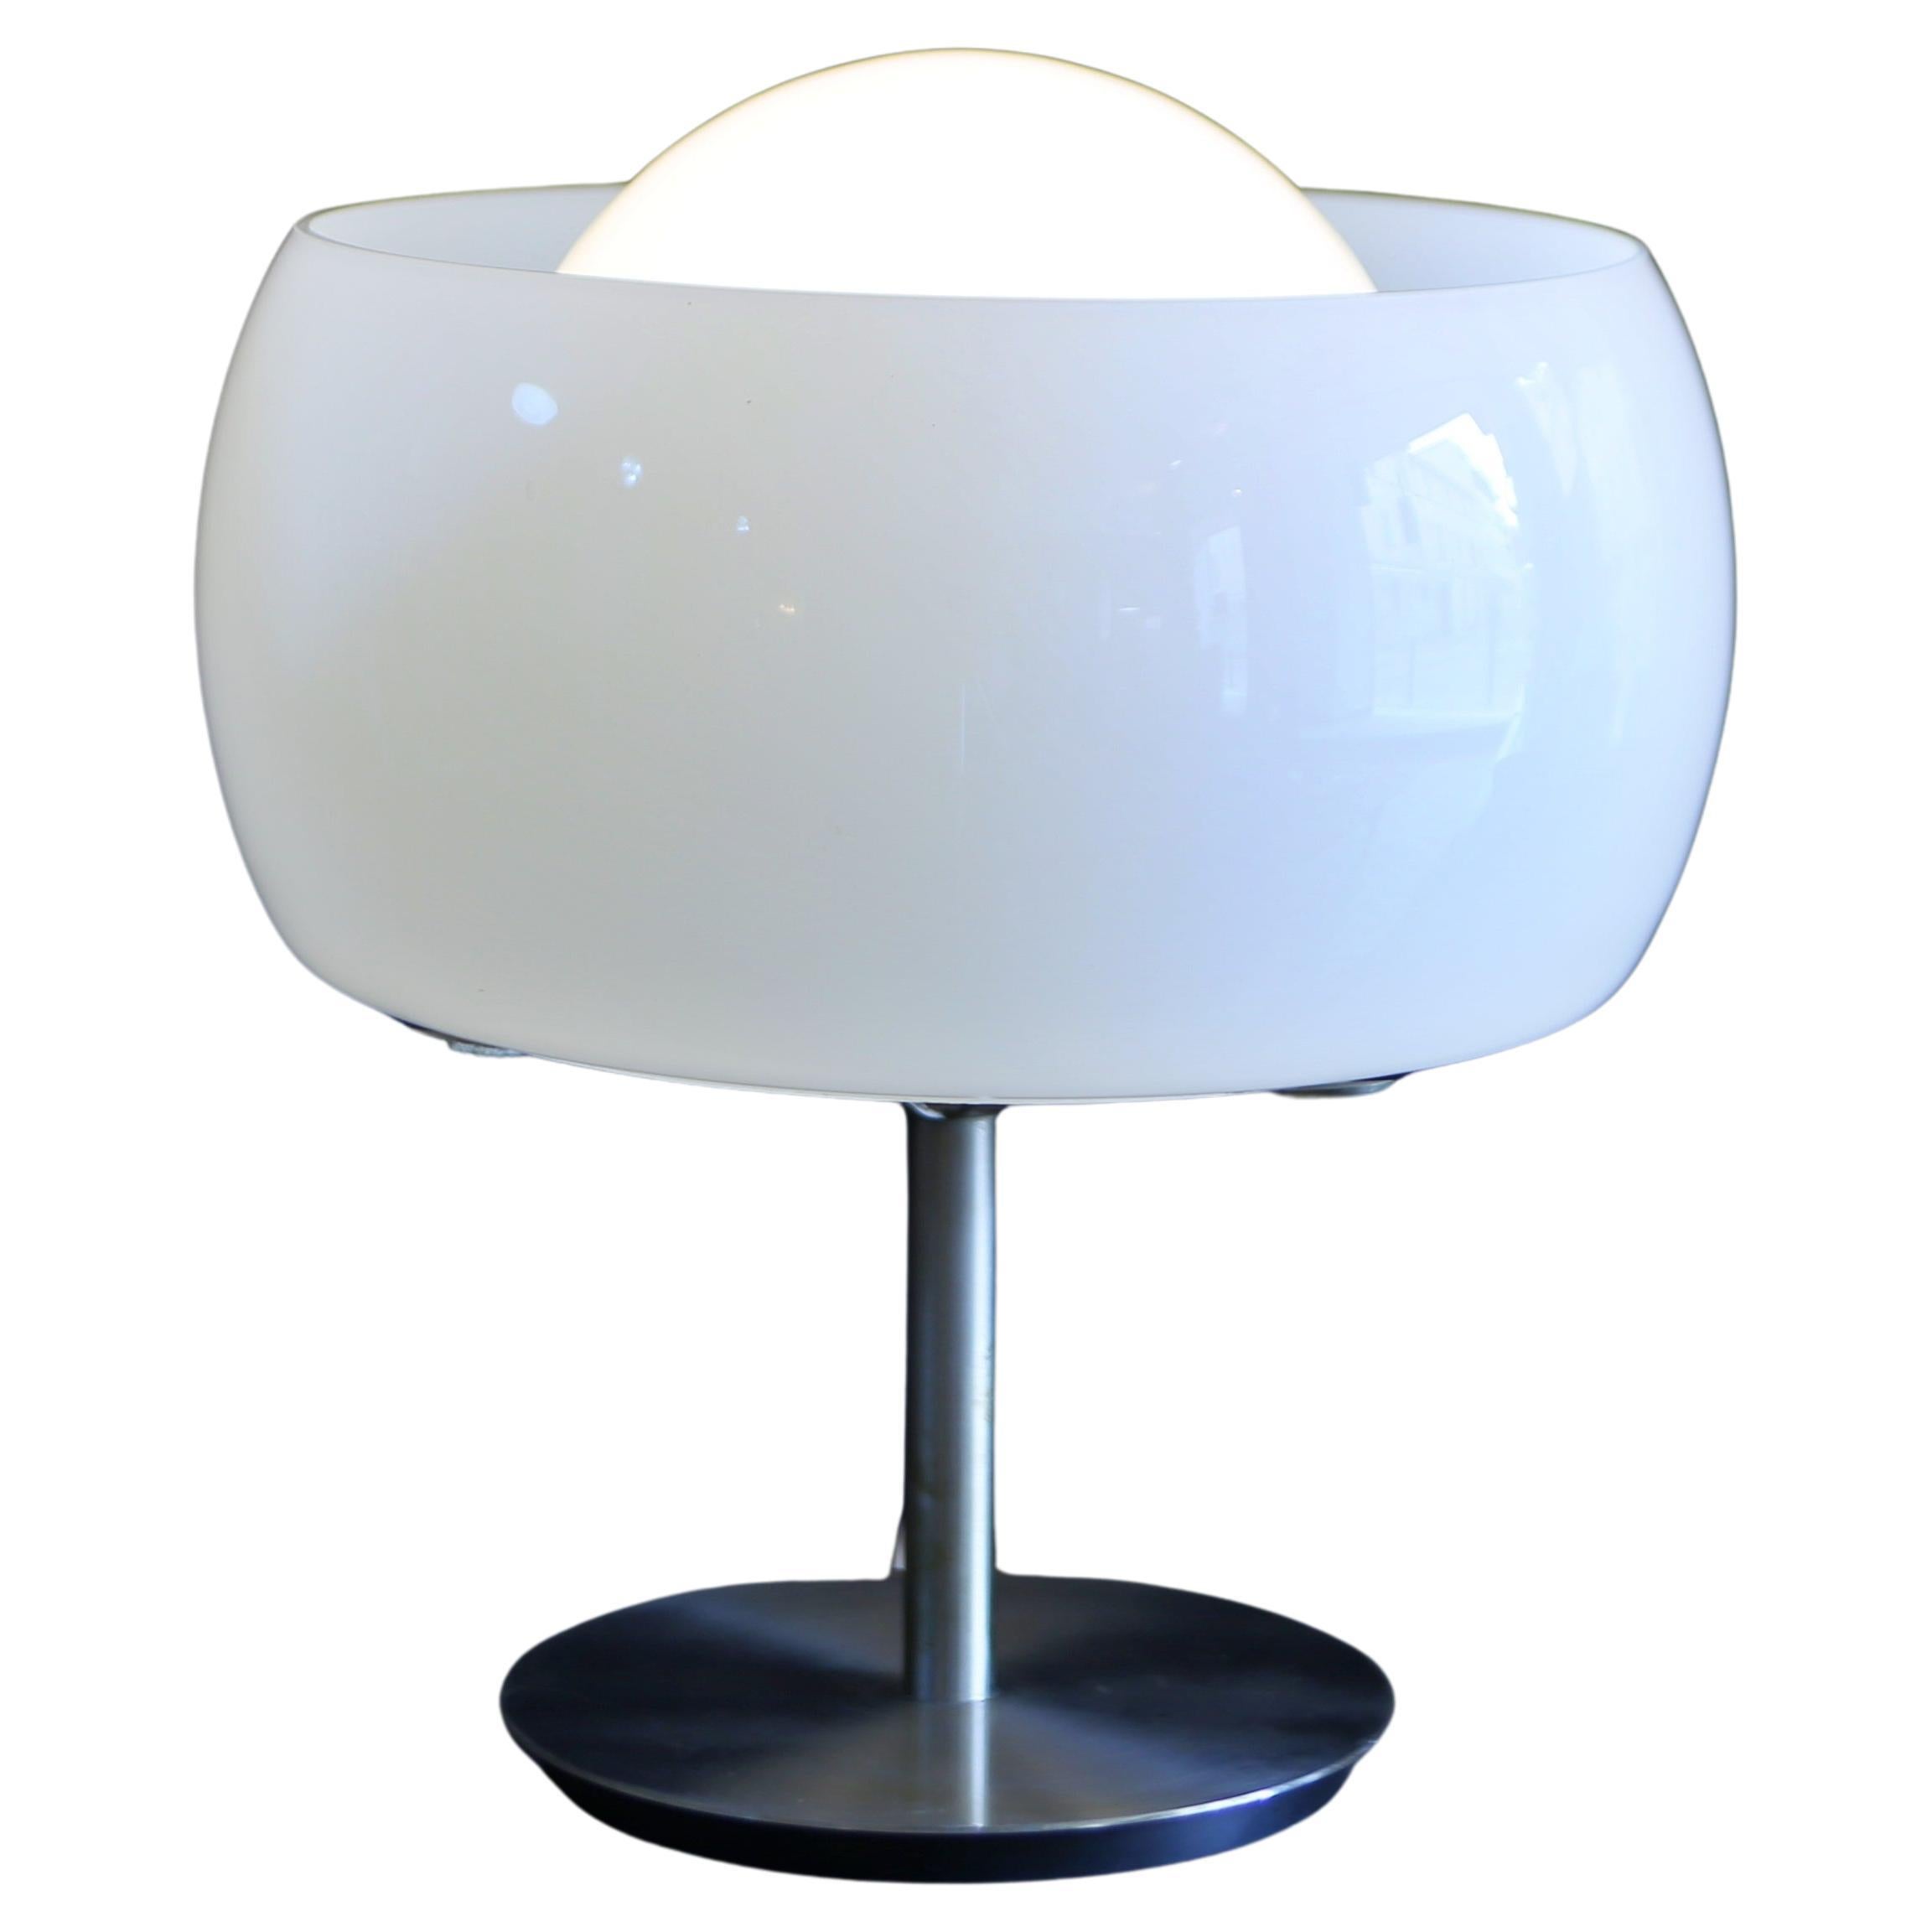 'Erse' Table Lamp by Vico Magistretti for Artemide 1964 For Sale